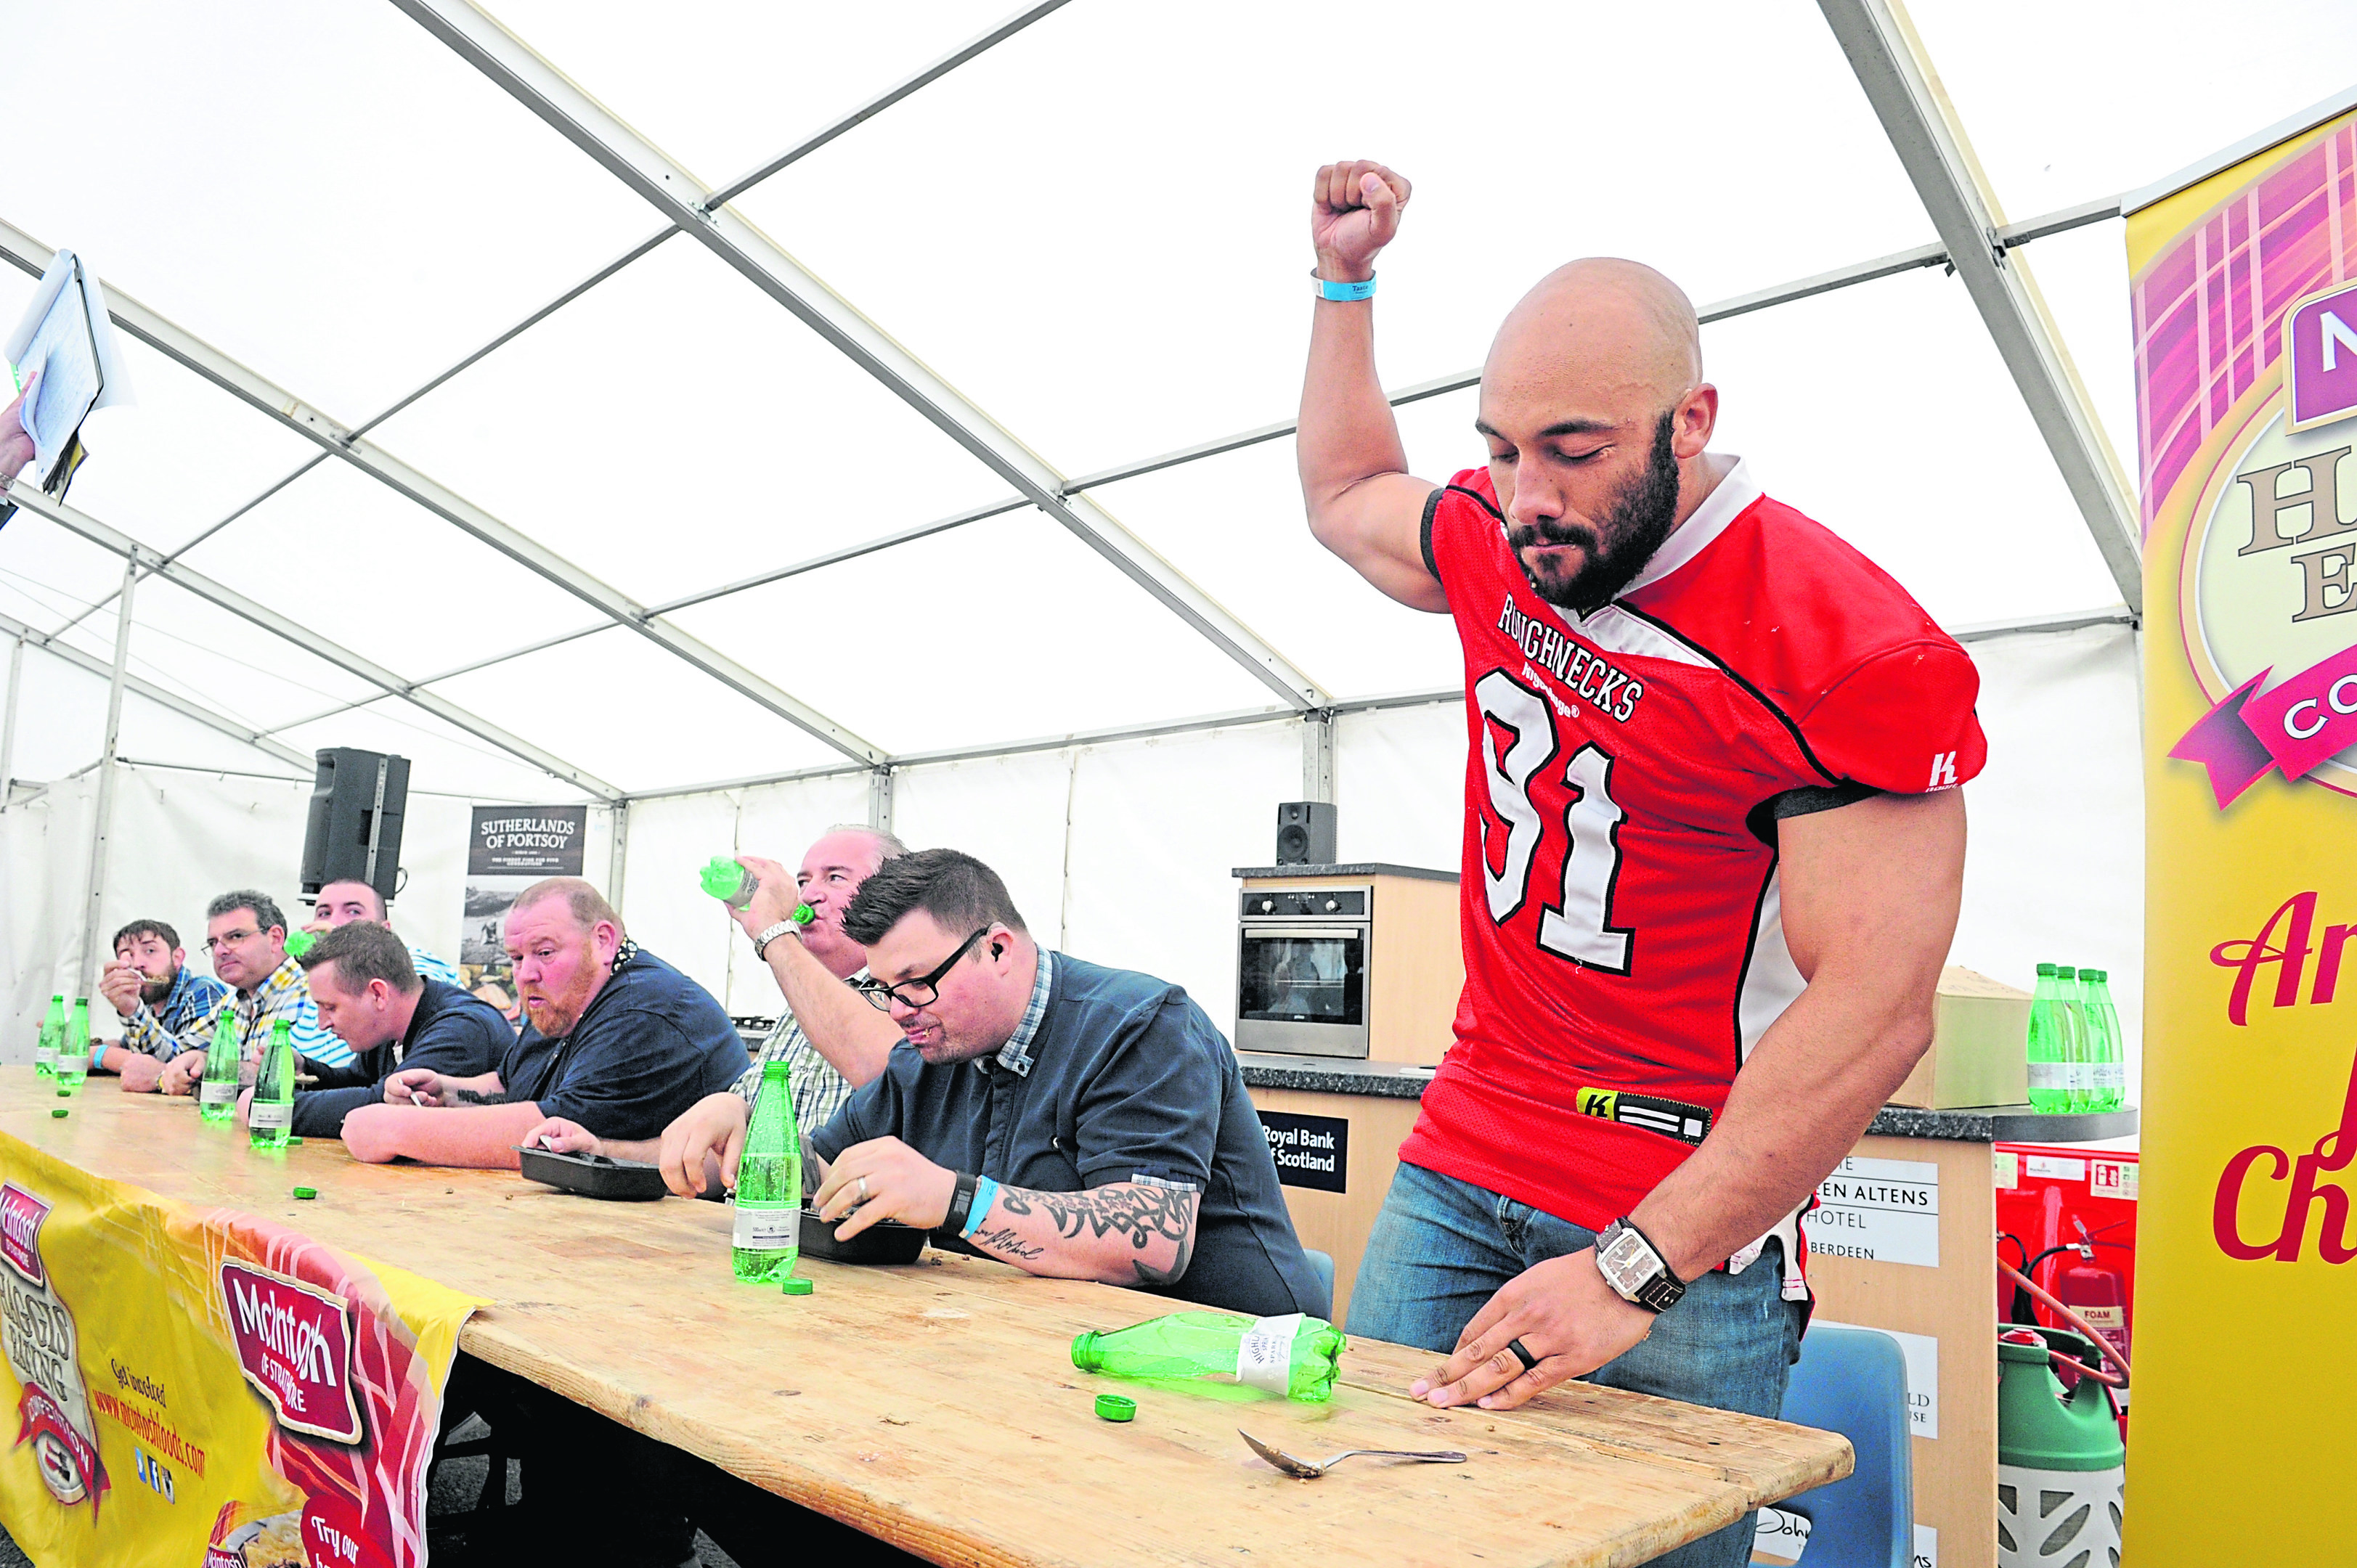 Richard Roach punches the air after winning the 2017 haggis-eating competition at the Thainstone Centre